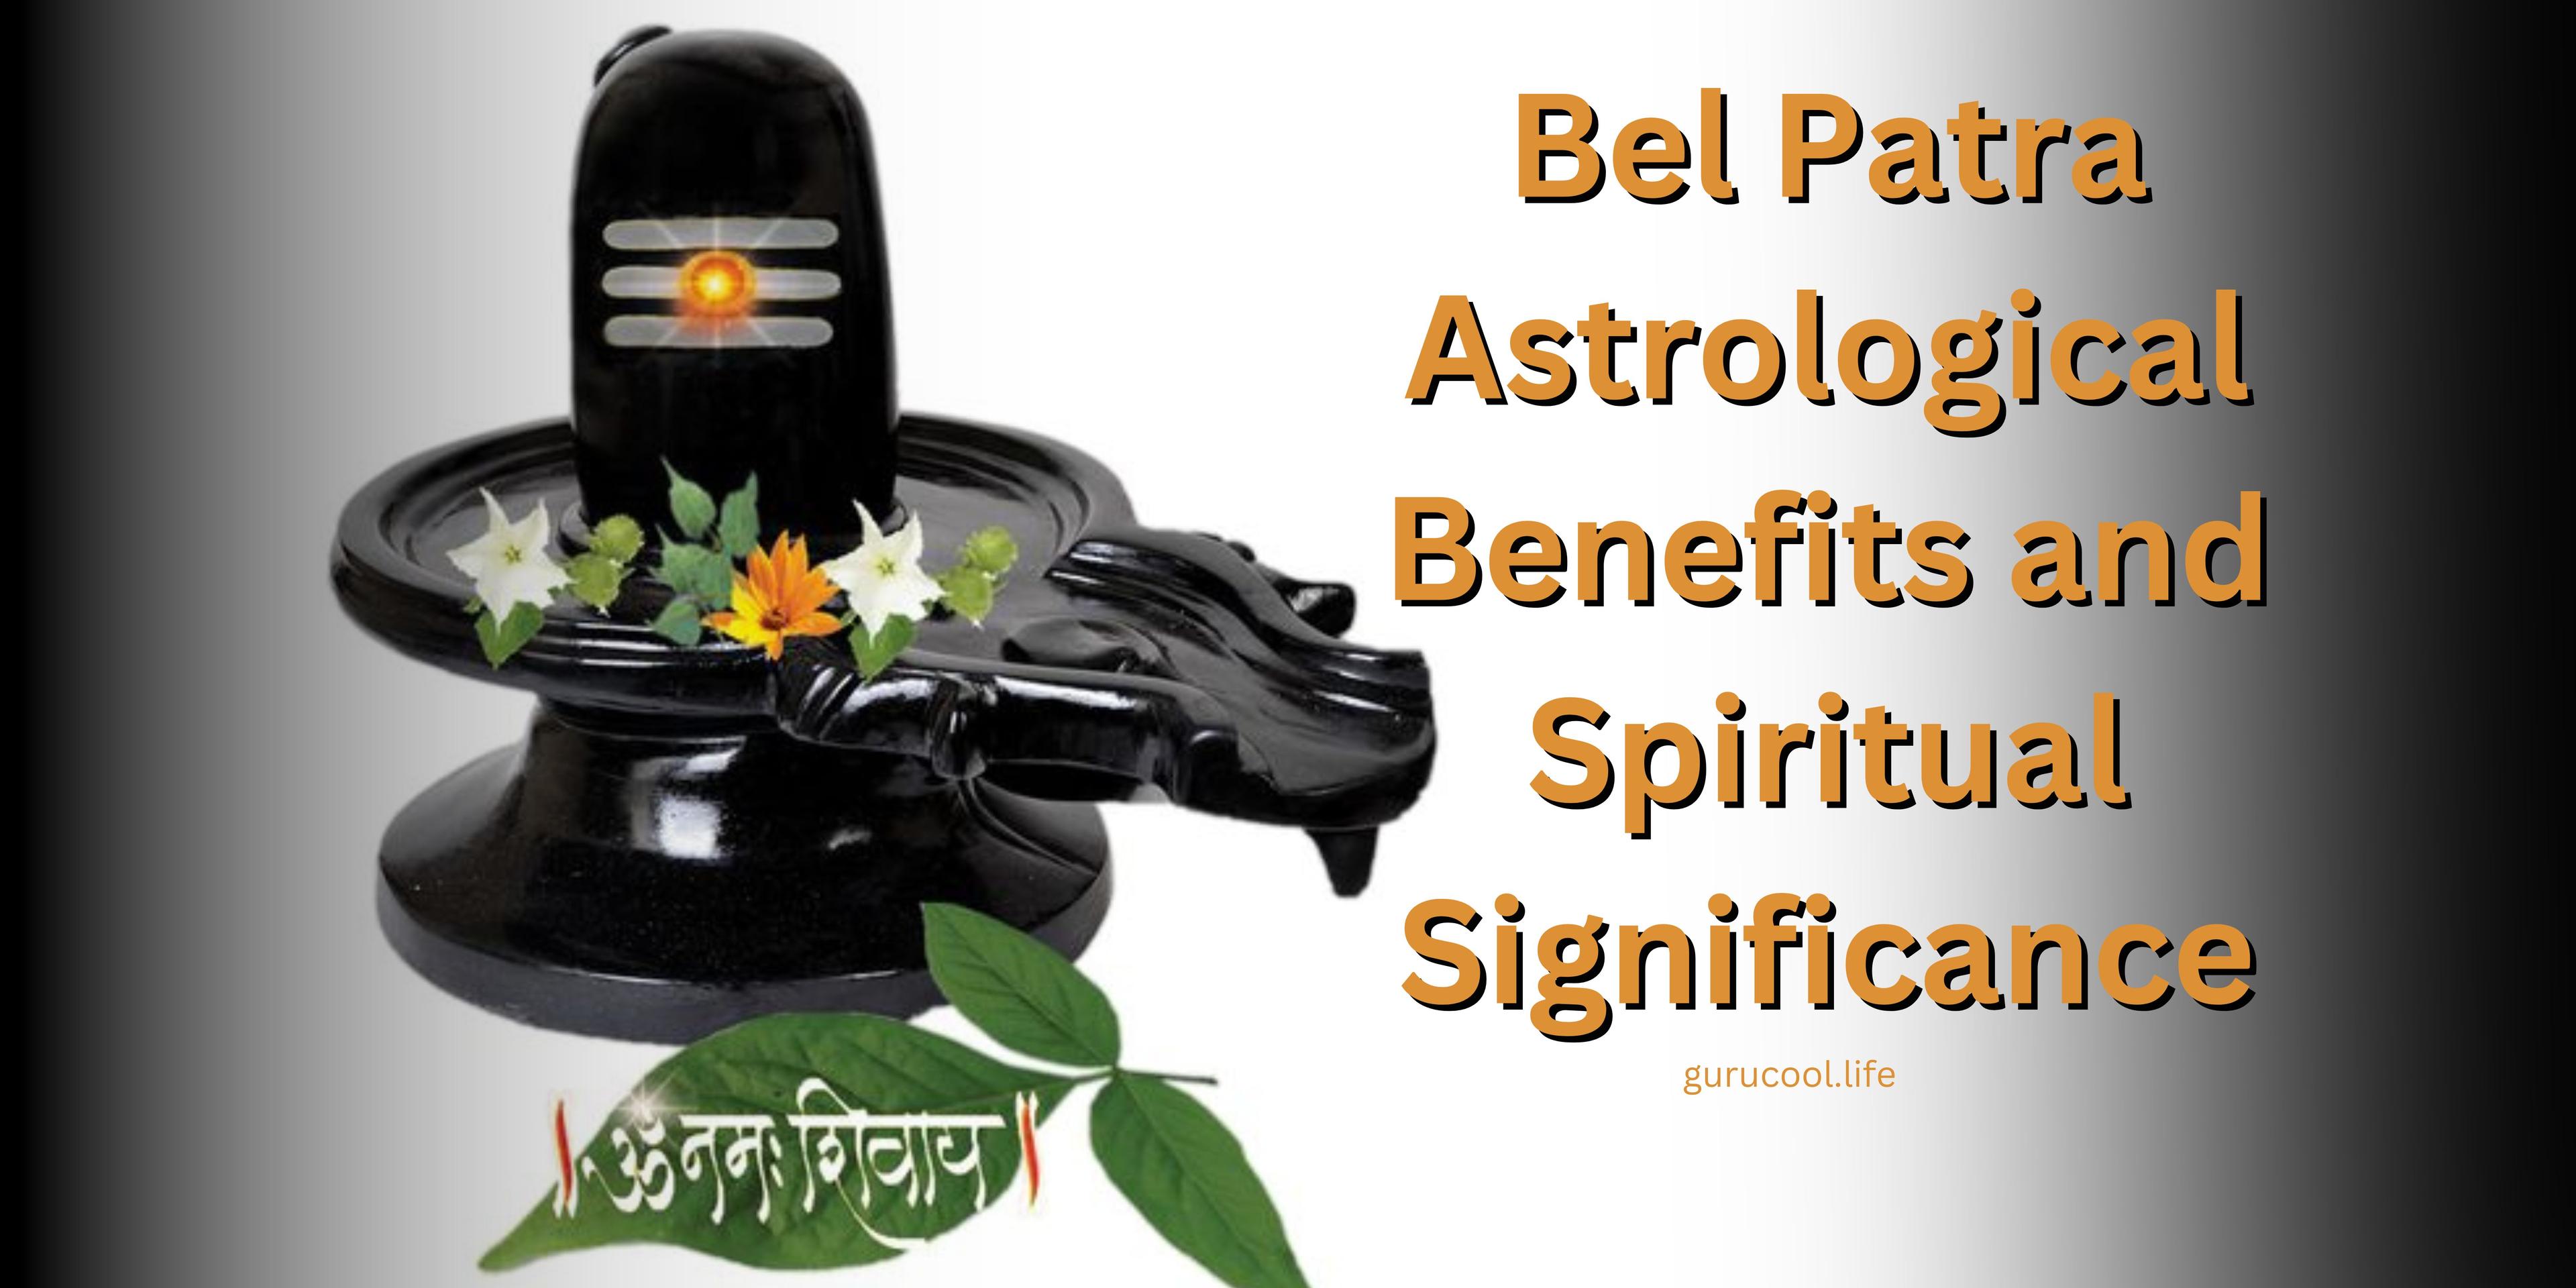 Bel Patra Astrological Benefits and Spiritual Significance